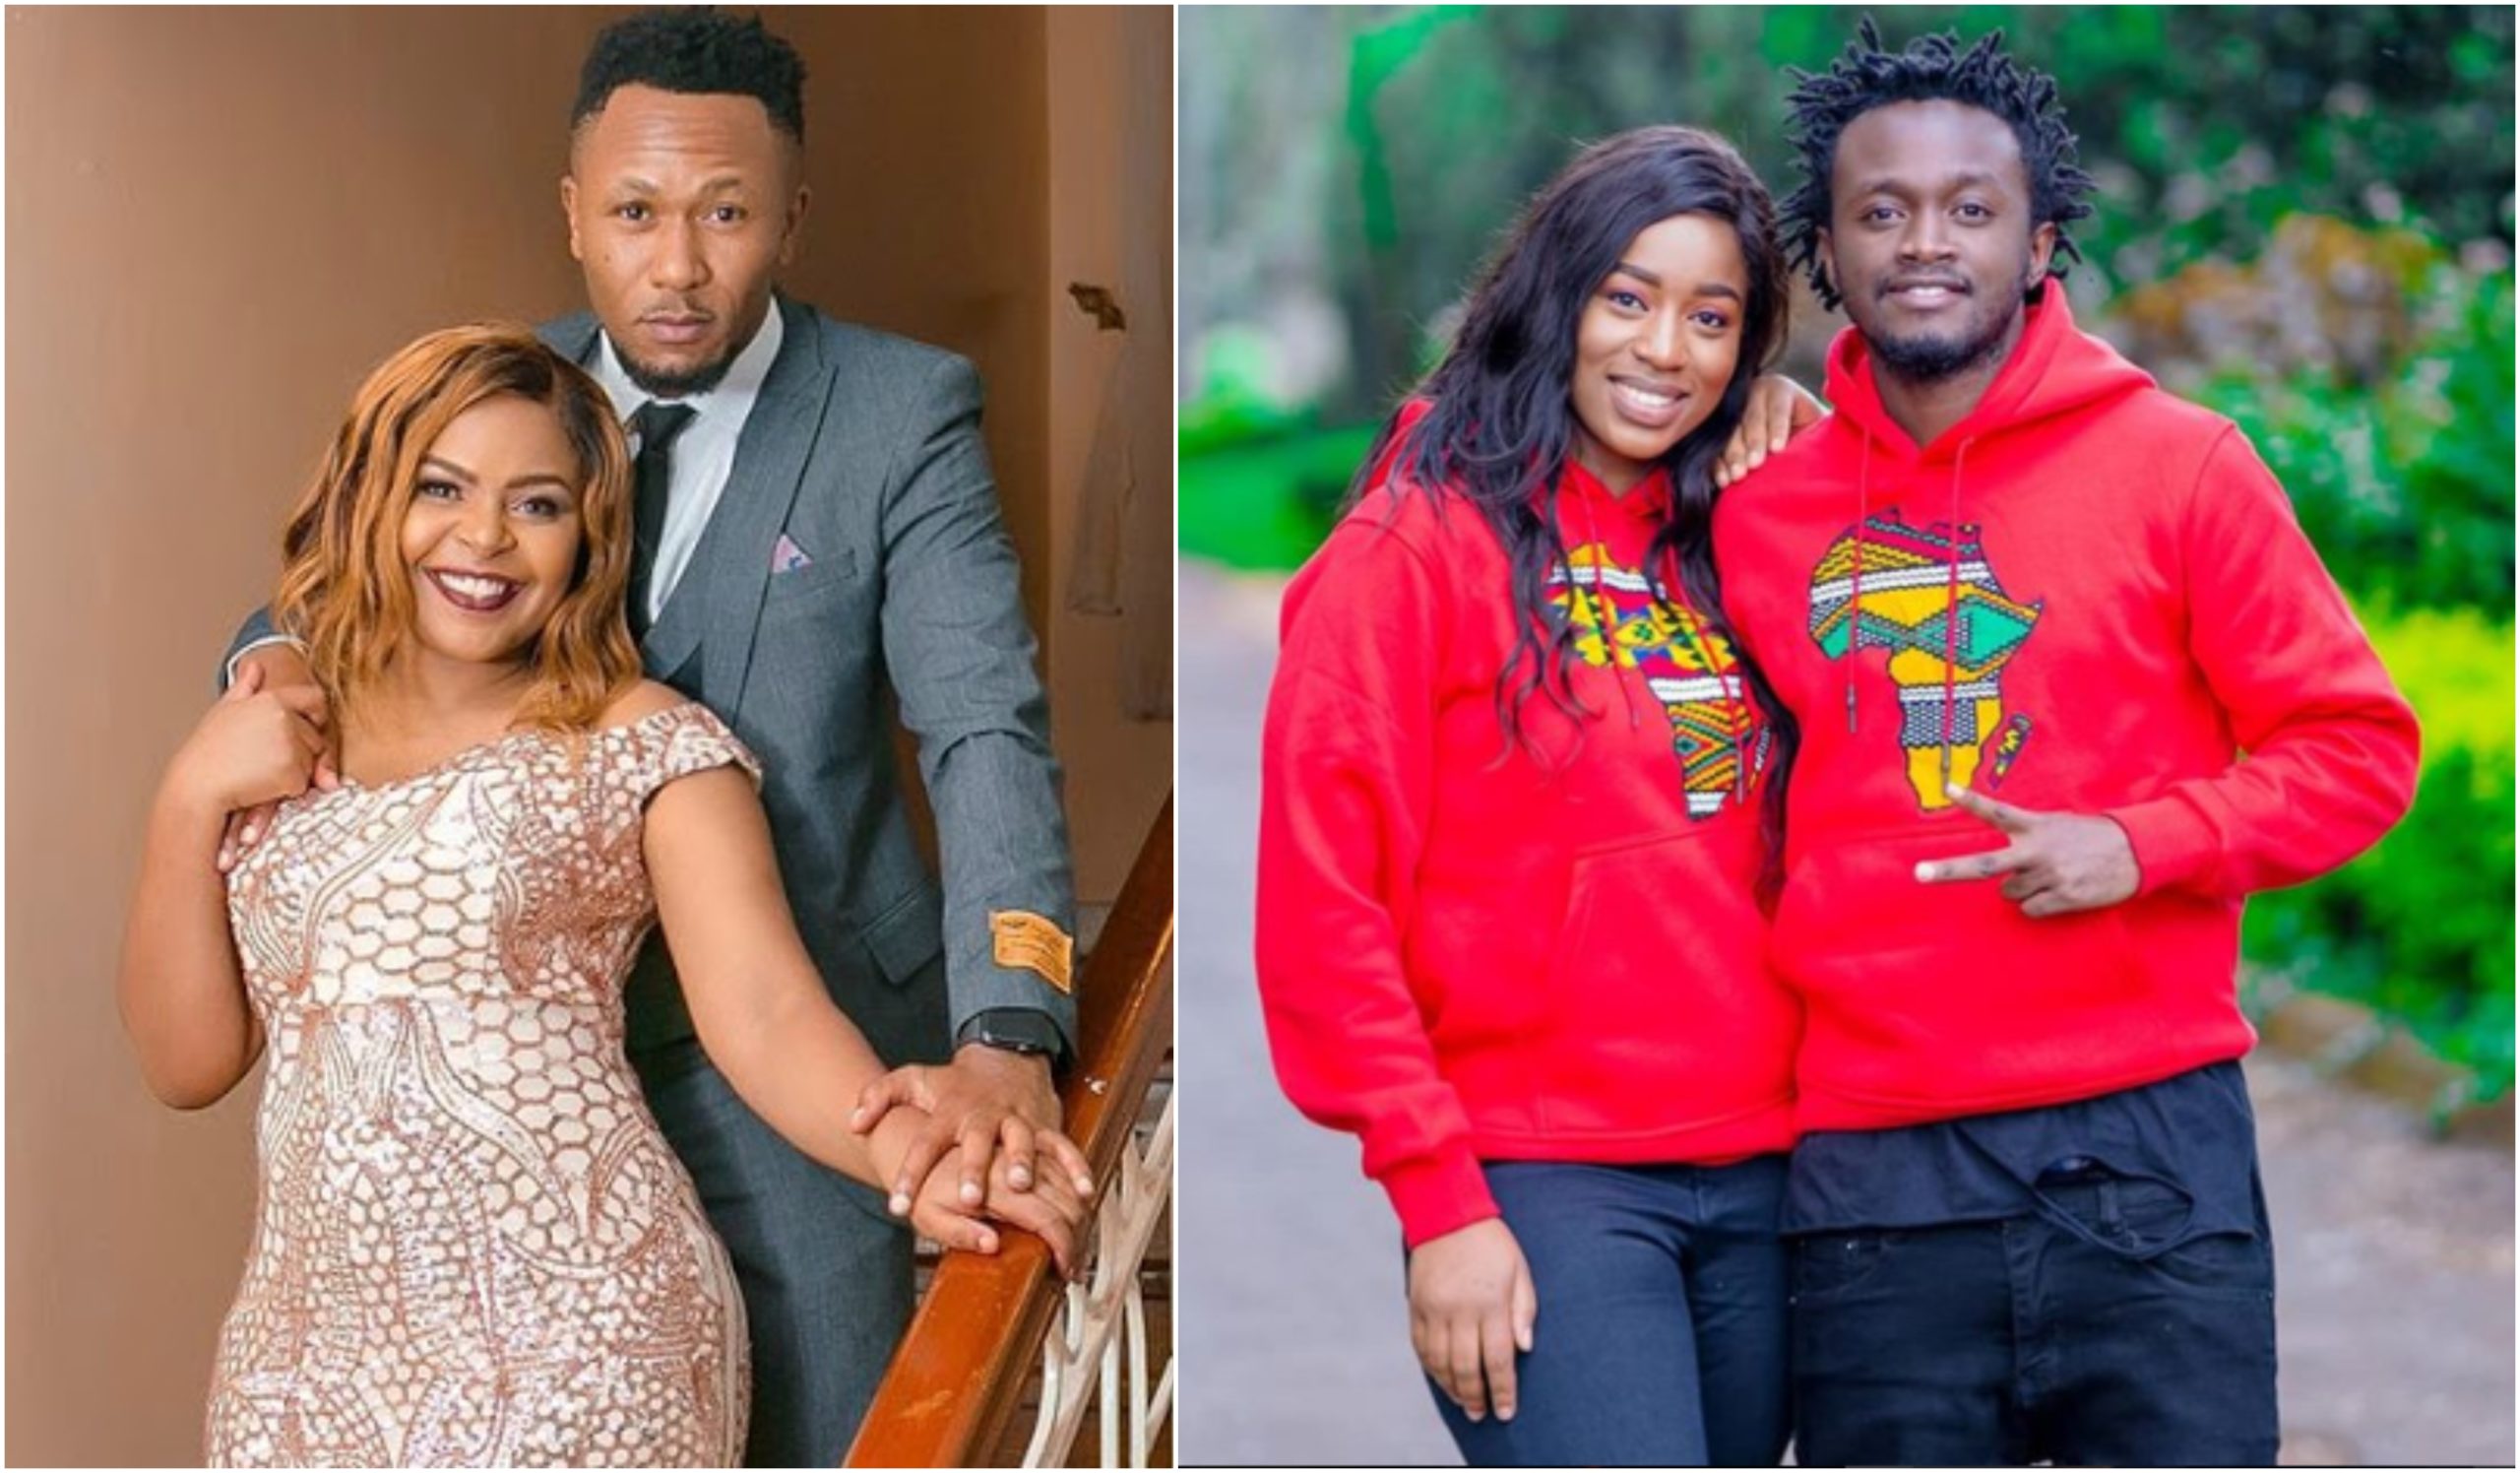 The Muraya’s reality TV show that might finally replace Bahati’s show